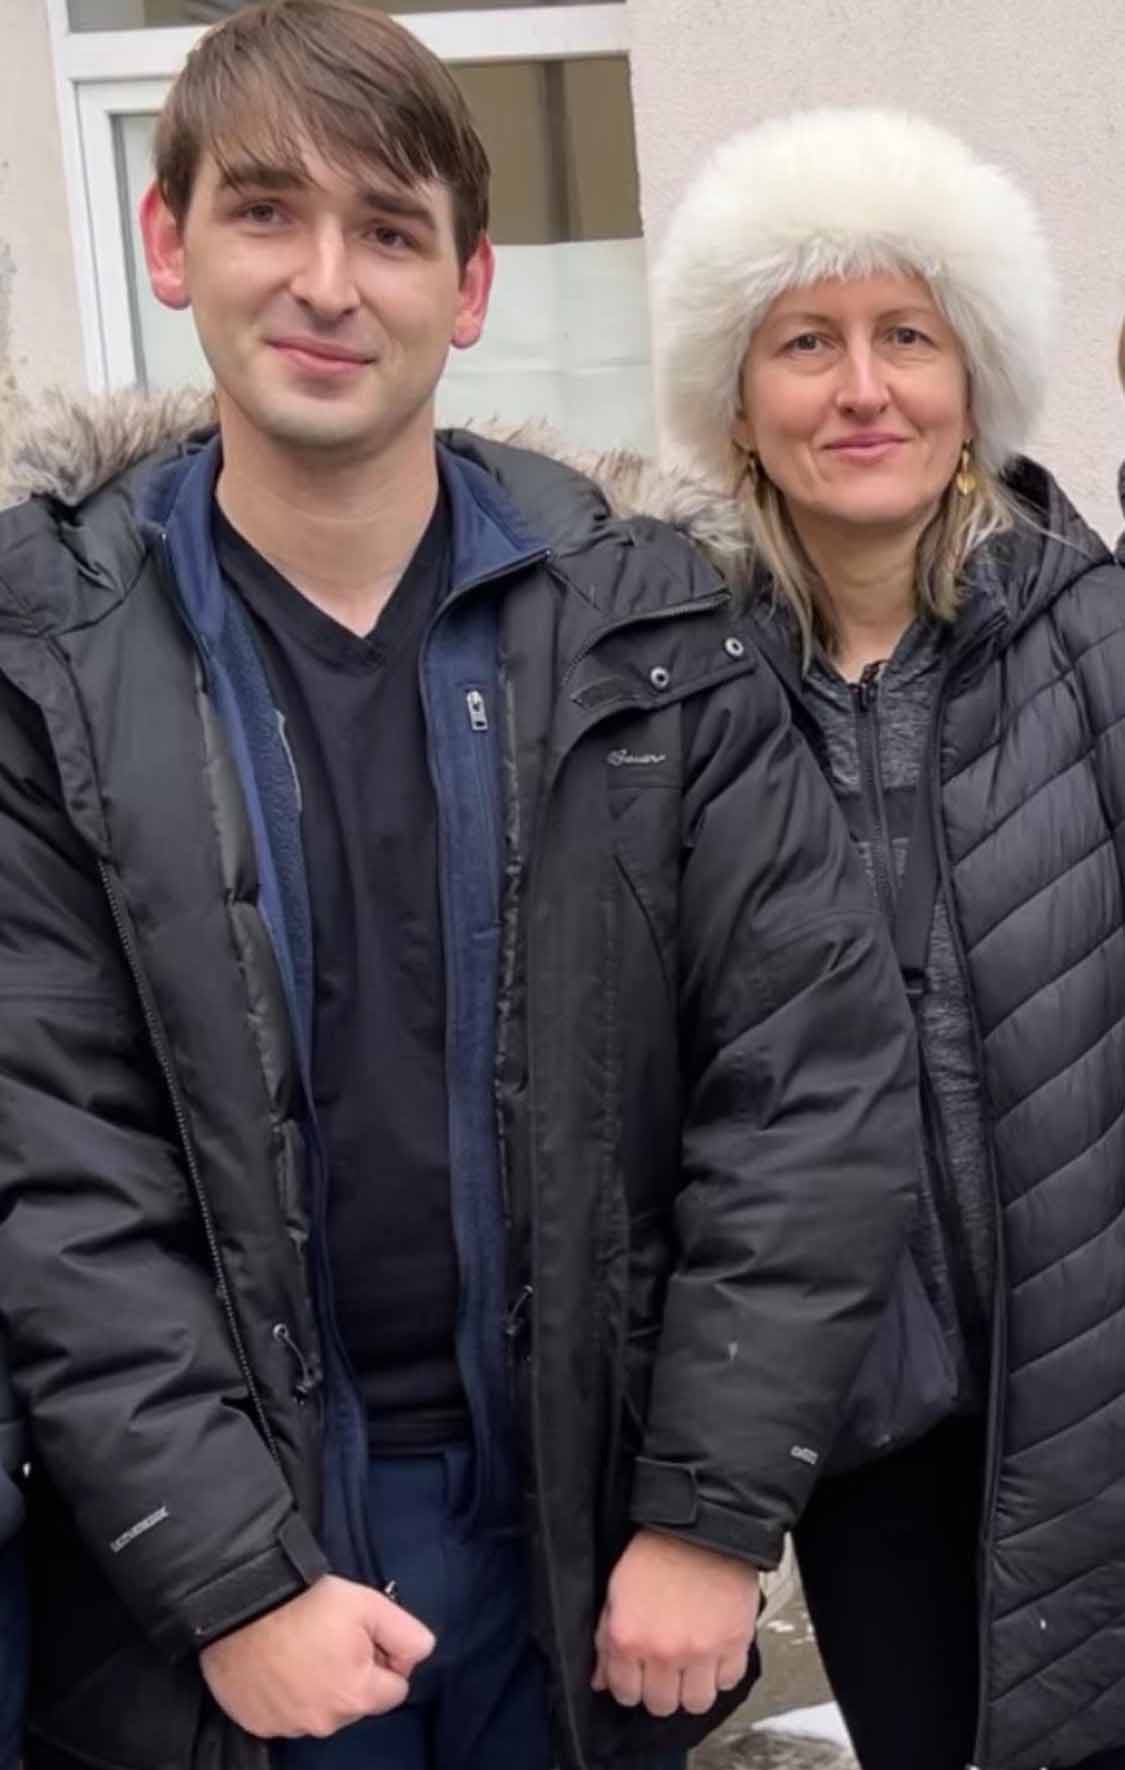 Liana Turkot, MD with her son, Oleg Turkot, MD